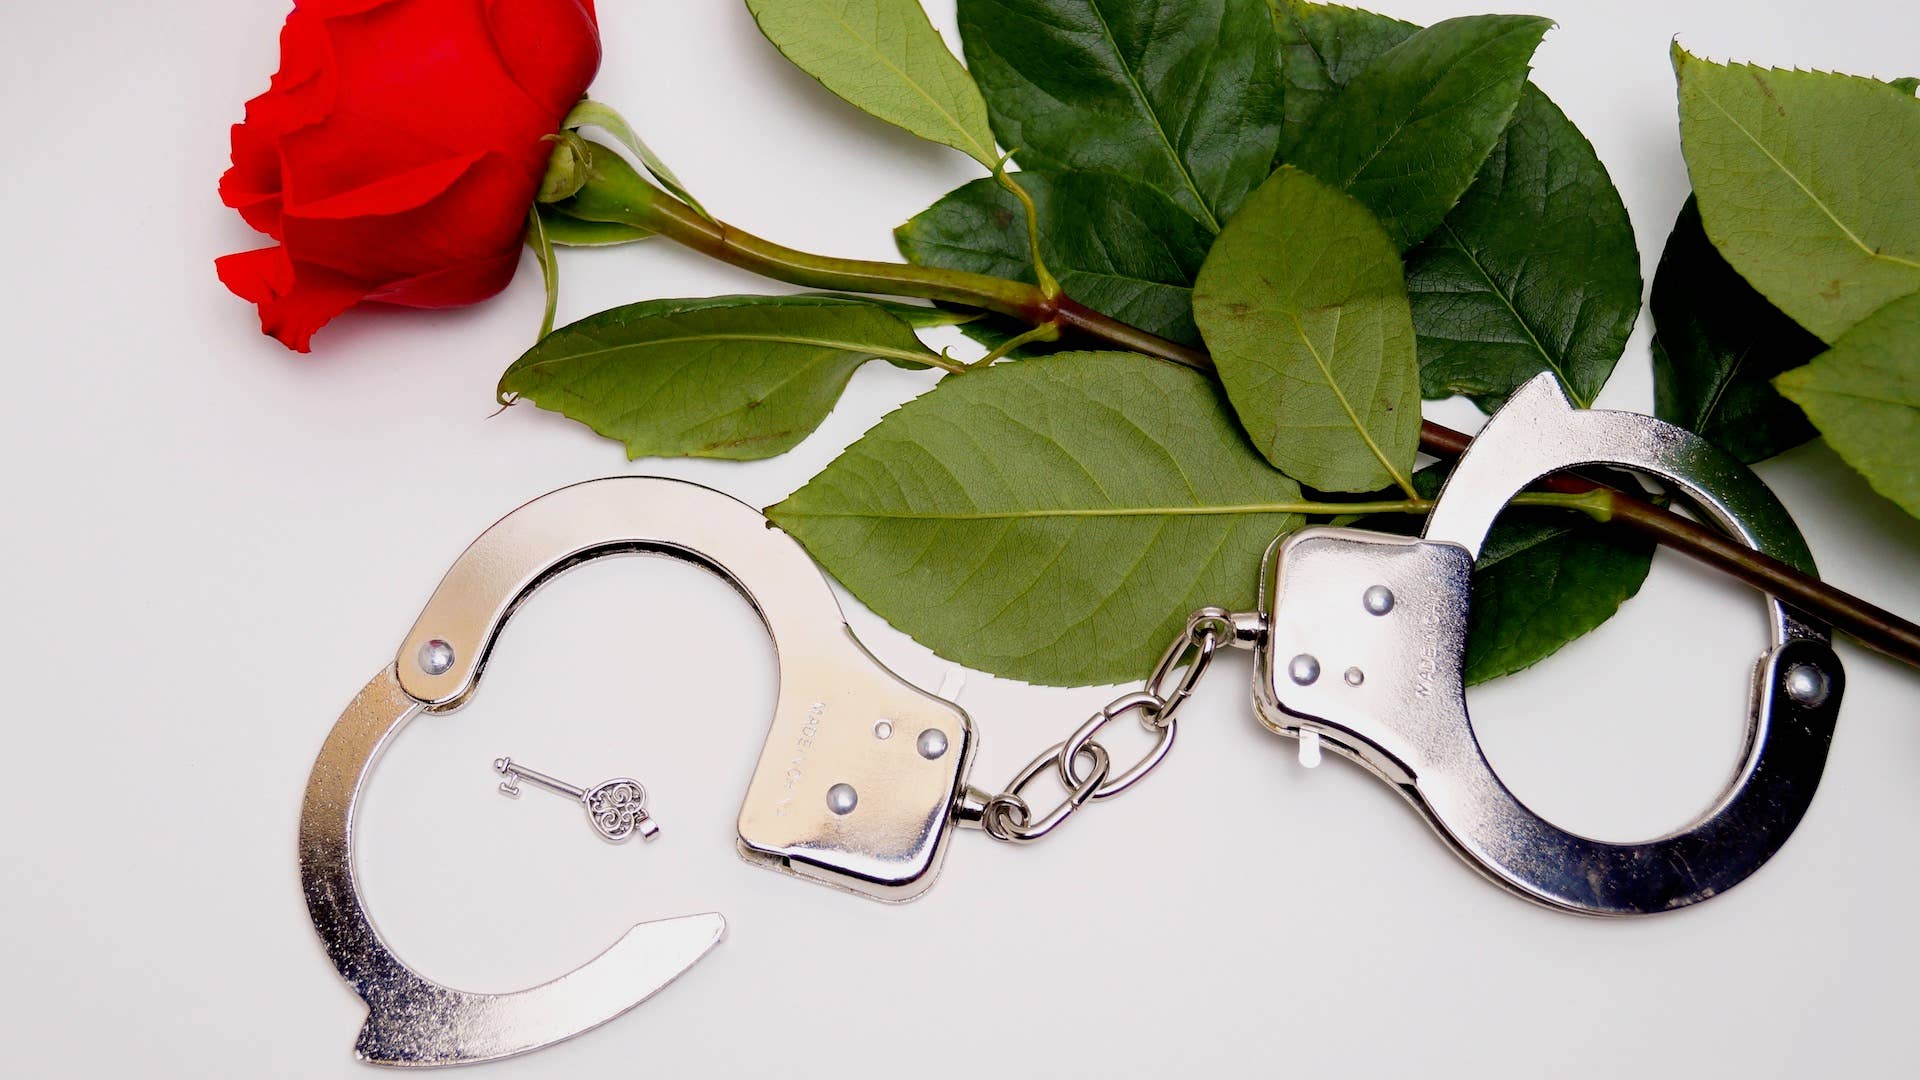 Georgia police department suggests turning in your bad ex for Valentine's Day